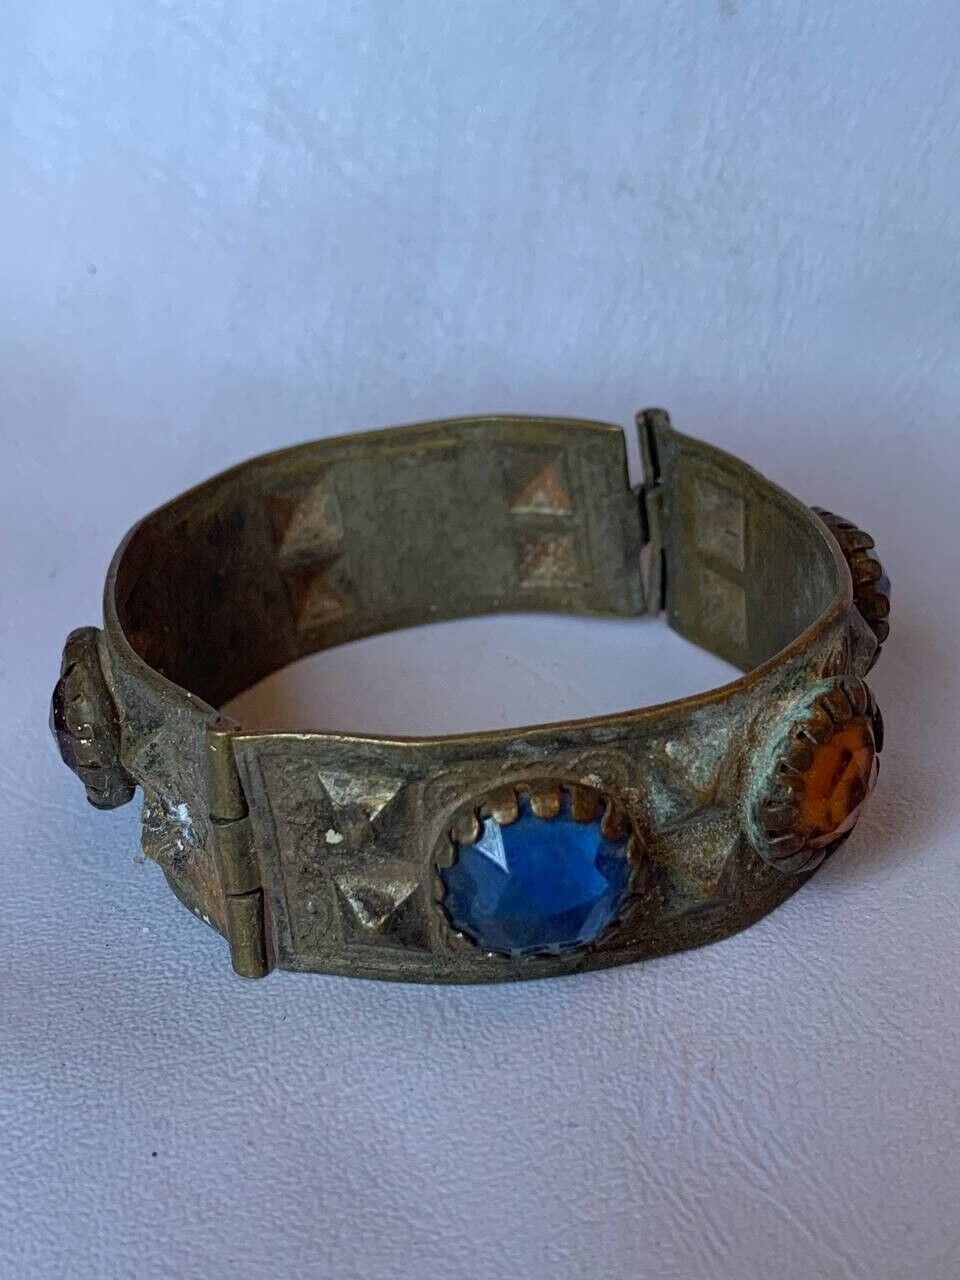 EXTREMELY VERY STUNNING RARE ANCIENT ROMAN BRACELET ENGRAVING BRONZE AUTHENTIC